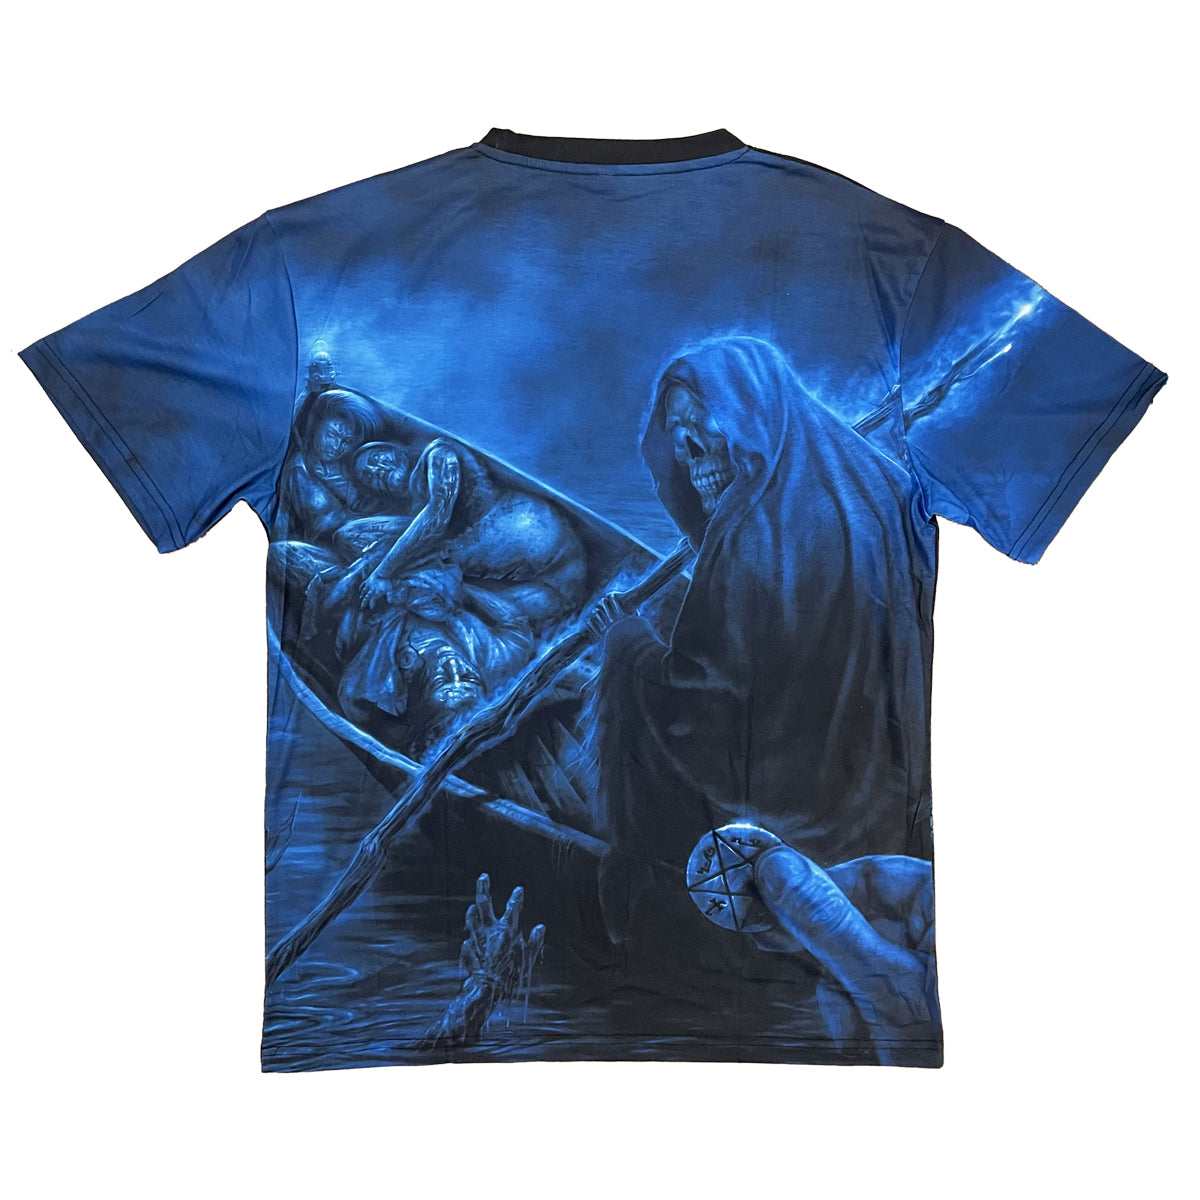 DEMONS & WIZARDS Demons & Wizards III Sublimated Multicolor T-Shirt